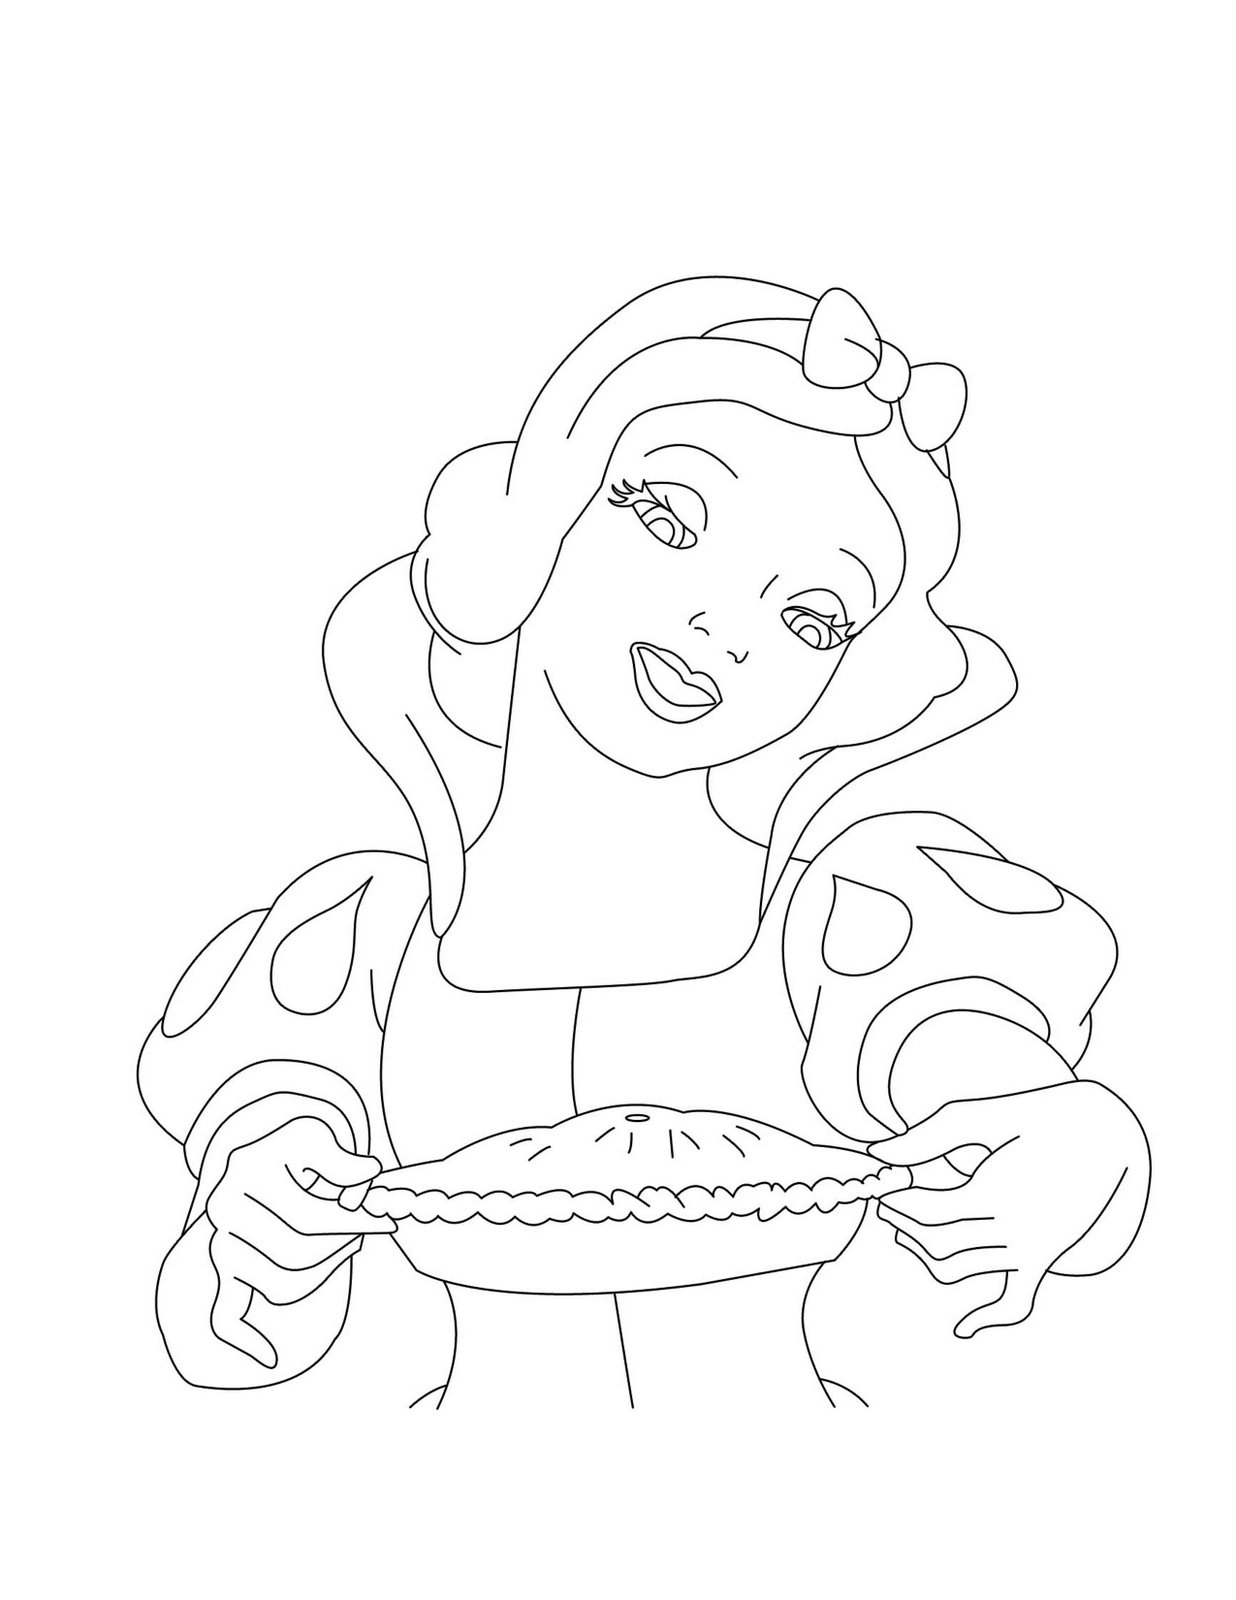 [princess-coloring-pages-snow-white-02.jpg]